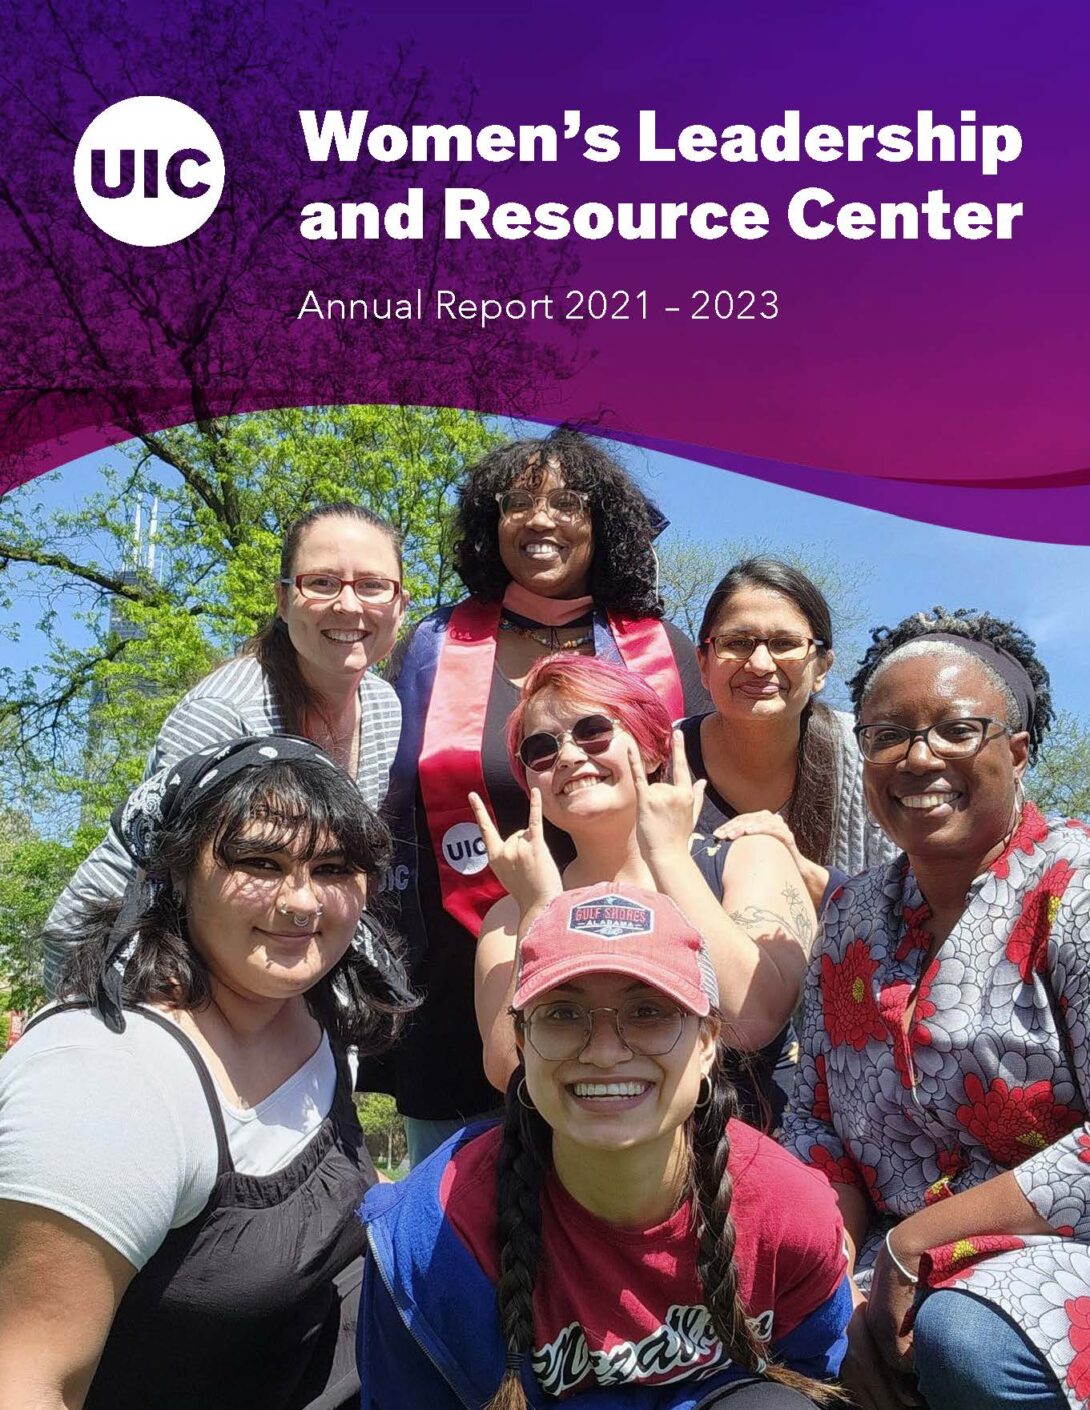 The front cover of WLRC's 2021-2023 Annual Report, which features a group photo of WLRC staff taken outdoors in May 2023.